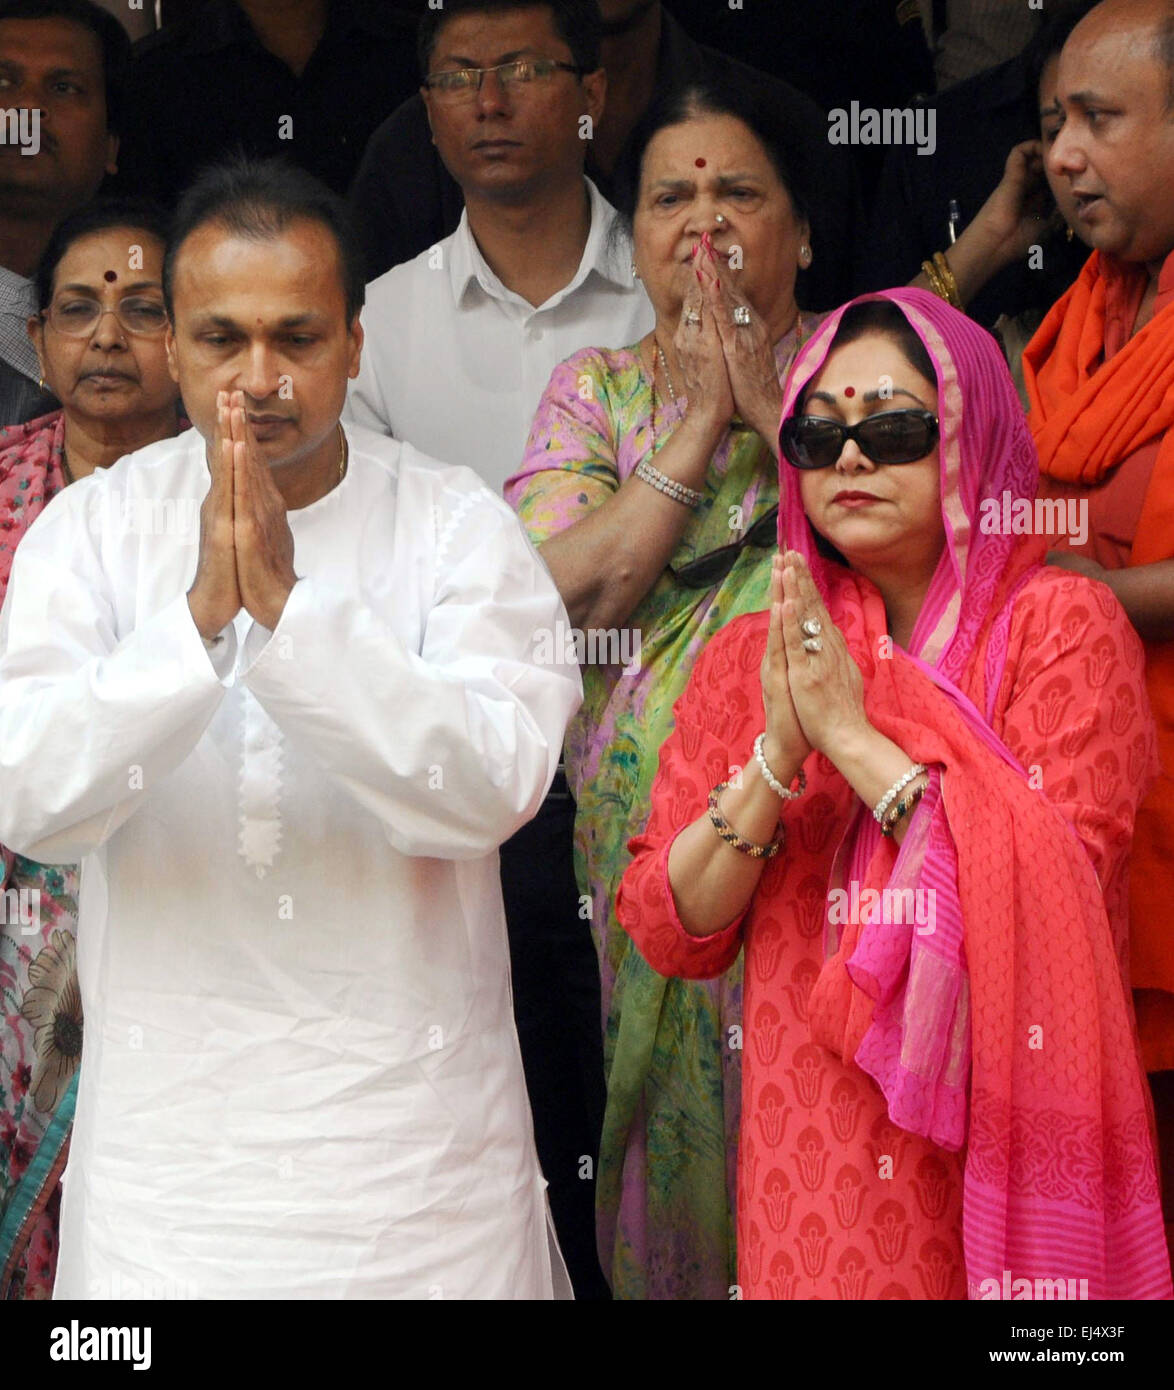 Guwahati, India's northeastern state of Assam. 21st Mar, 2015. Indian business tycoon Anil Dhirubhai Ambani (L, front) and his wife Tina Ambani (R, front) offer prayers at the famous Kamakhya Temple in Guwahati, capital of India's northeastern state of Assam, March 21, 2015. © Stringer/Xinhua/Alamy Live News Stock Photo